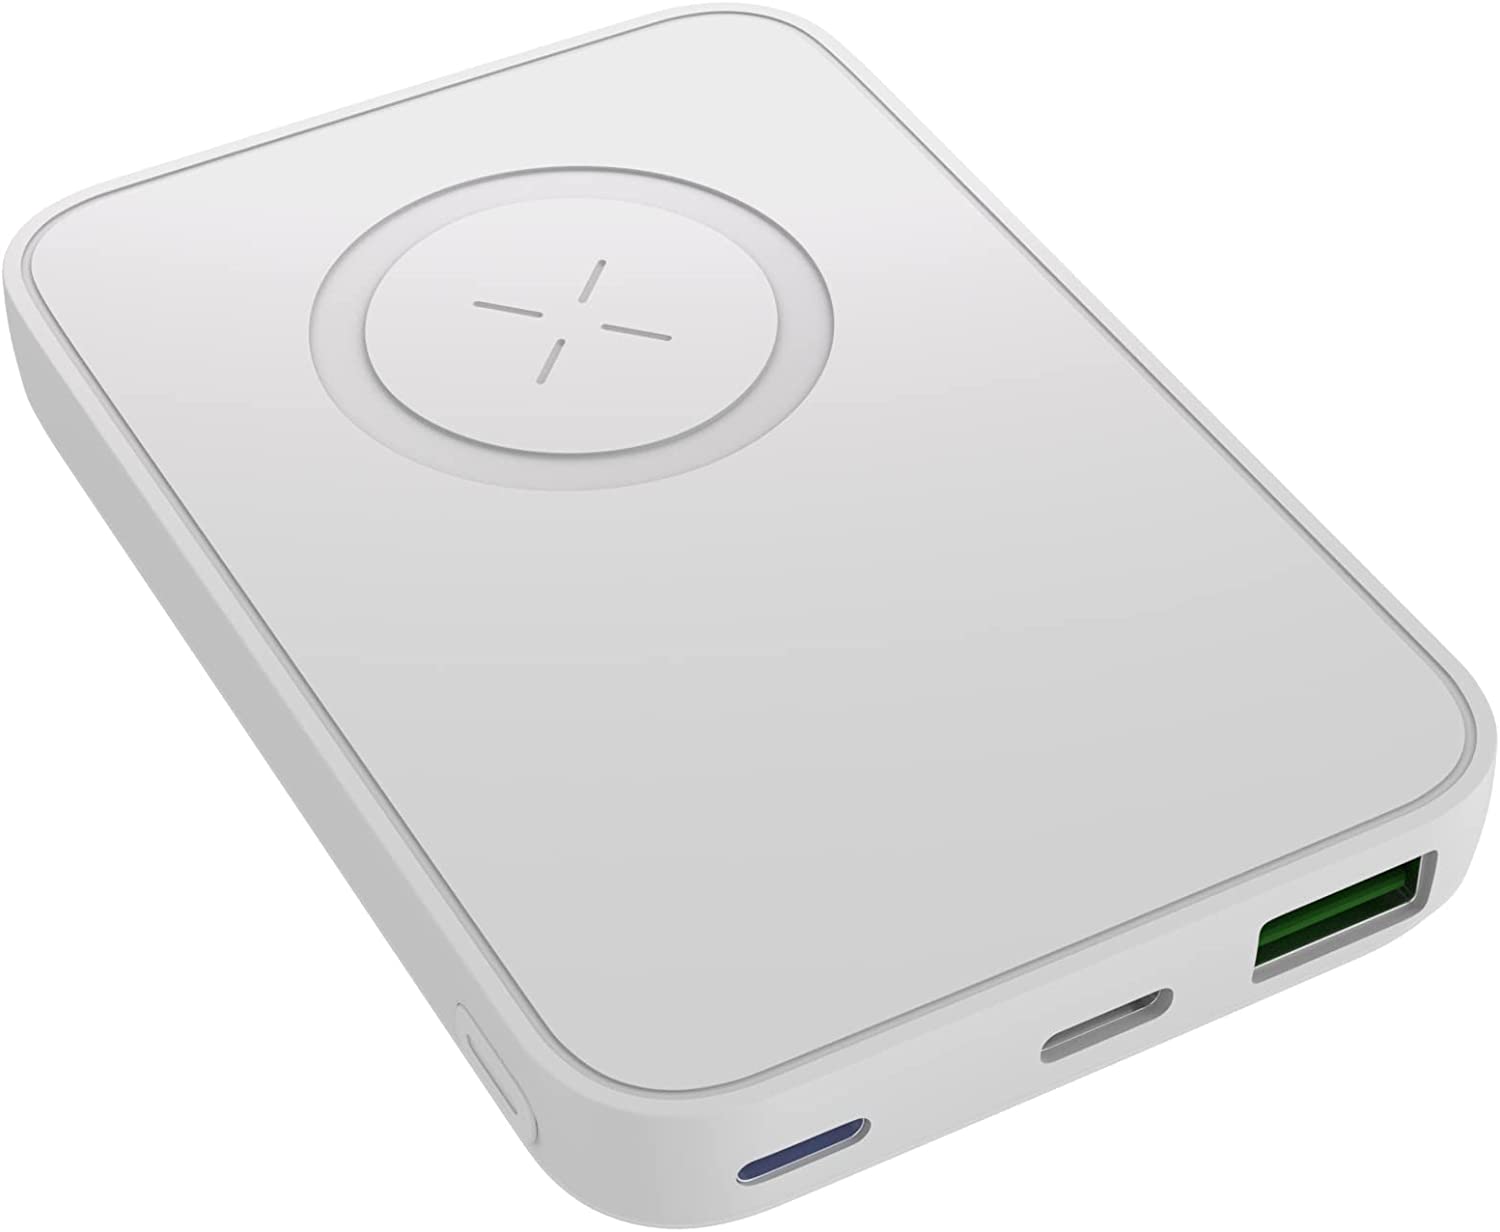 Onn. 4000MAh Magsafe Power Bank Made for iPhone 12 Series and Newer .White  